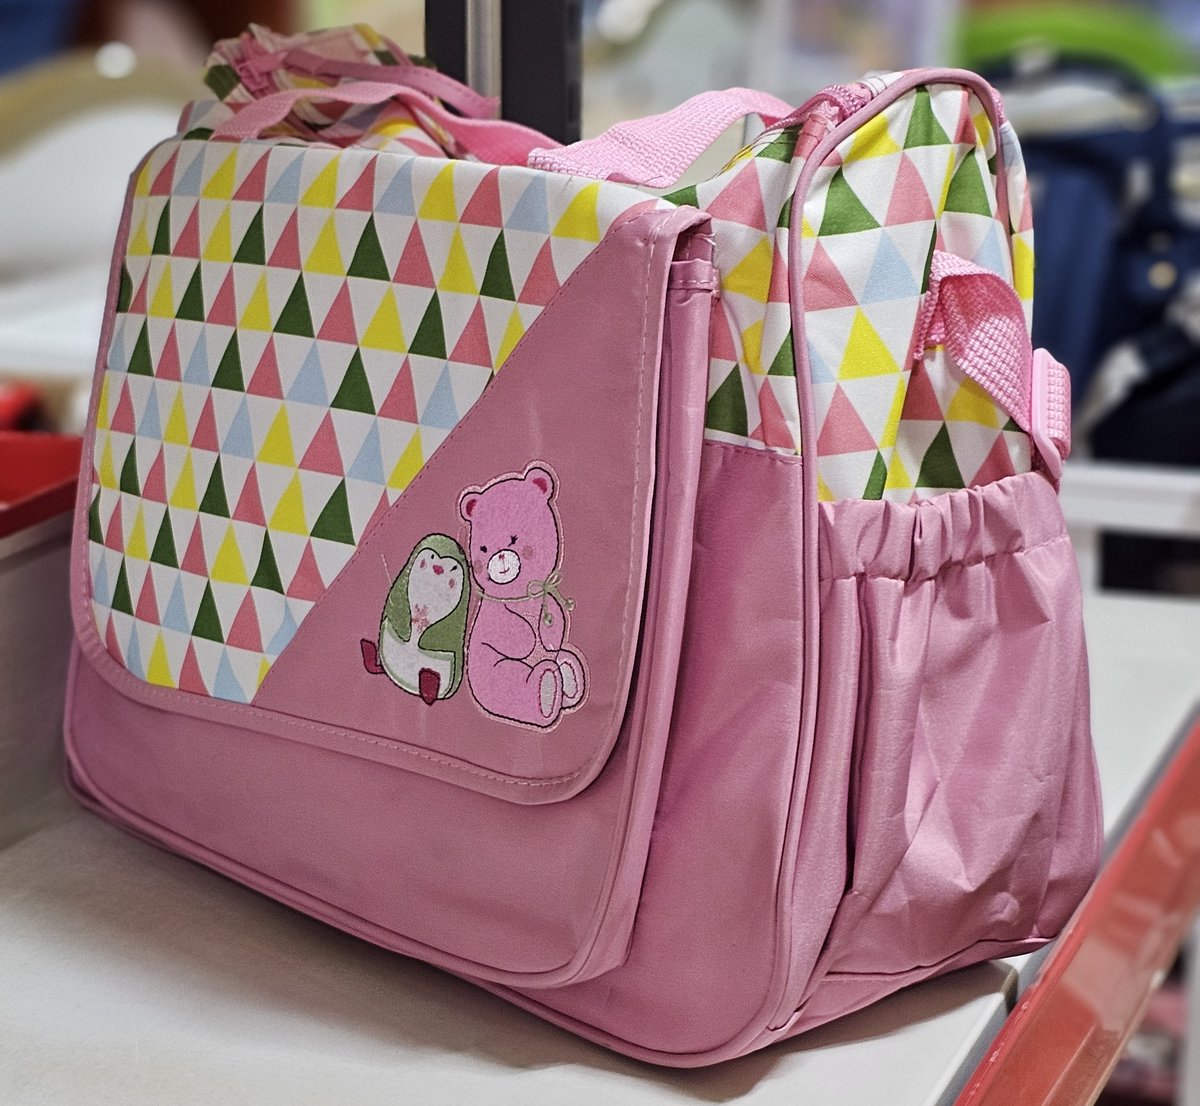 A diaper bag is designed to carry essential items for your baby when you are on the go.

Find these diaper bags at any of our branches.

For delivery Call / WhatsApp 
+256 759 676225 / 0774 999 468

#diaperbag #babygirl #kids